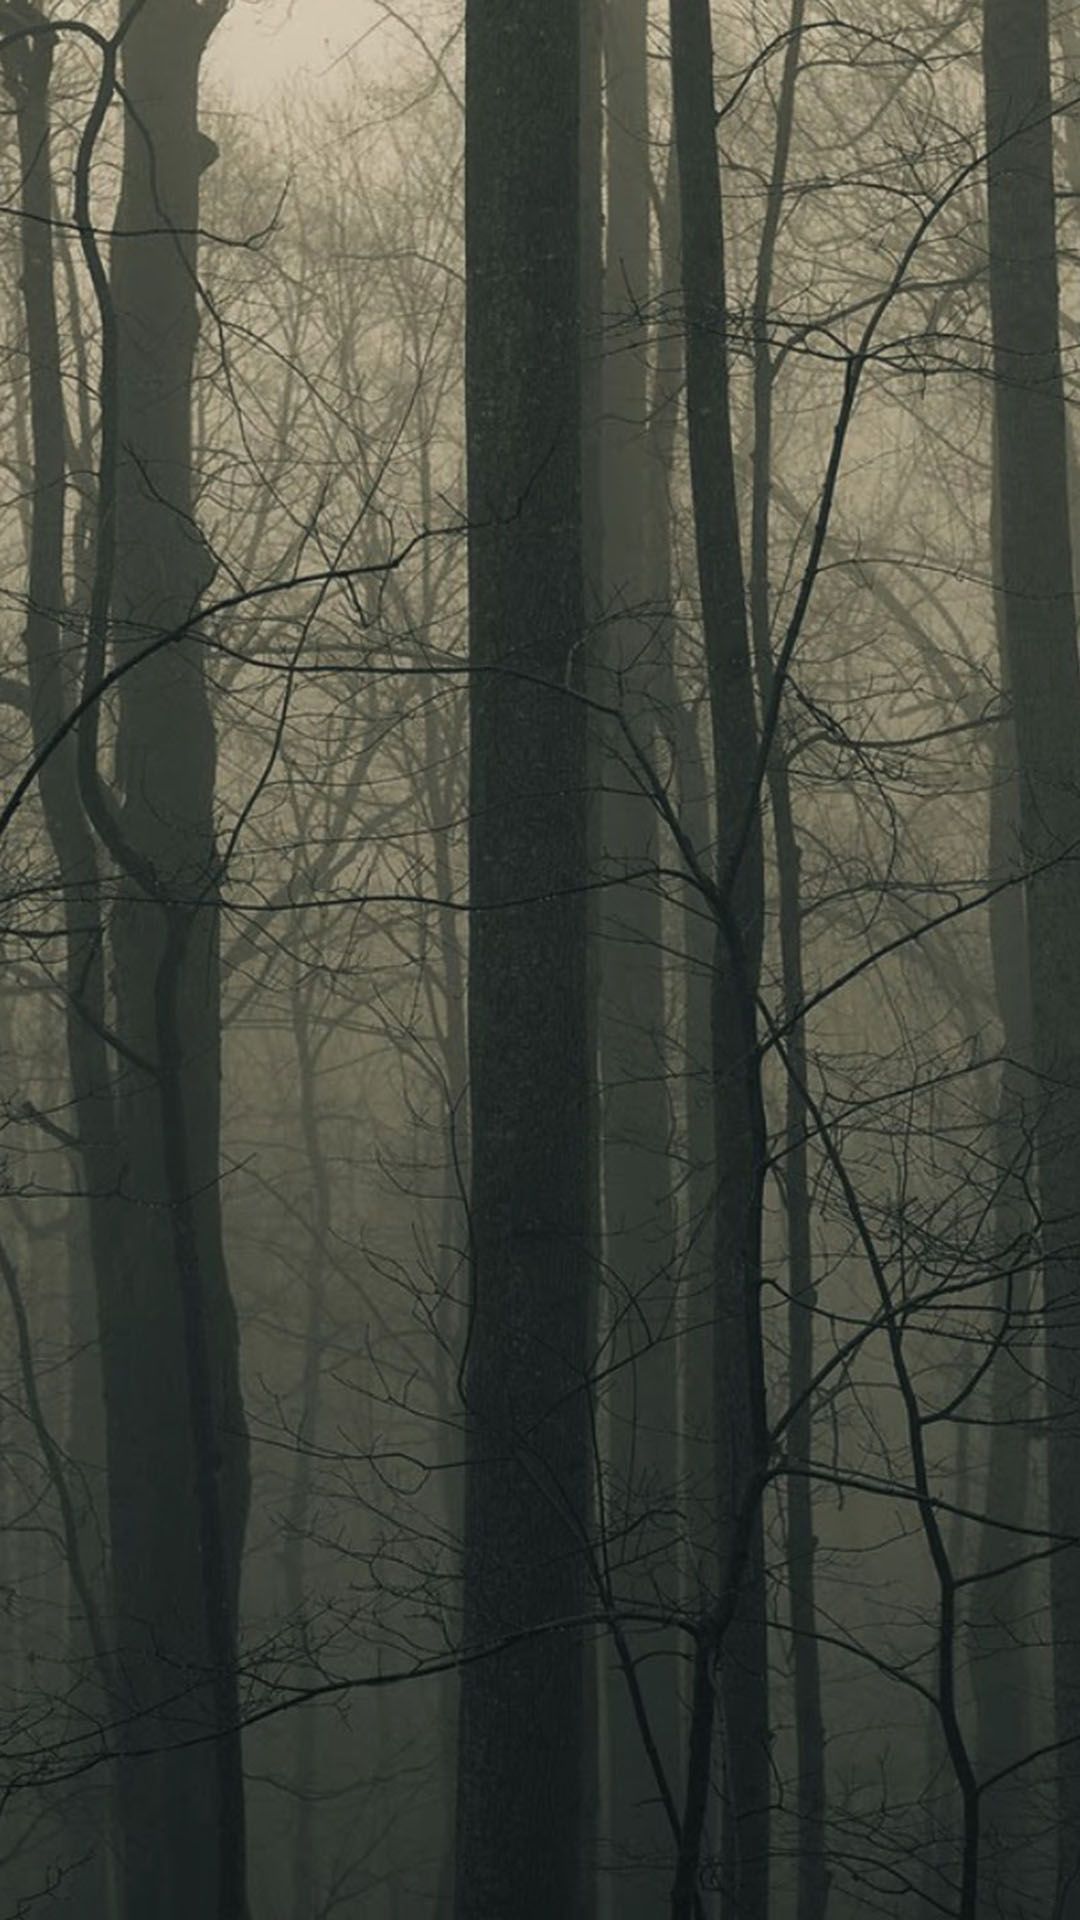 Scary Forest Phone Wallpaper. iPhone Wallpaper, Phone Wallpaper and Beautiful iPhone Wallpaper